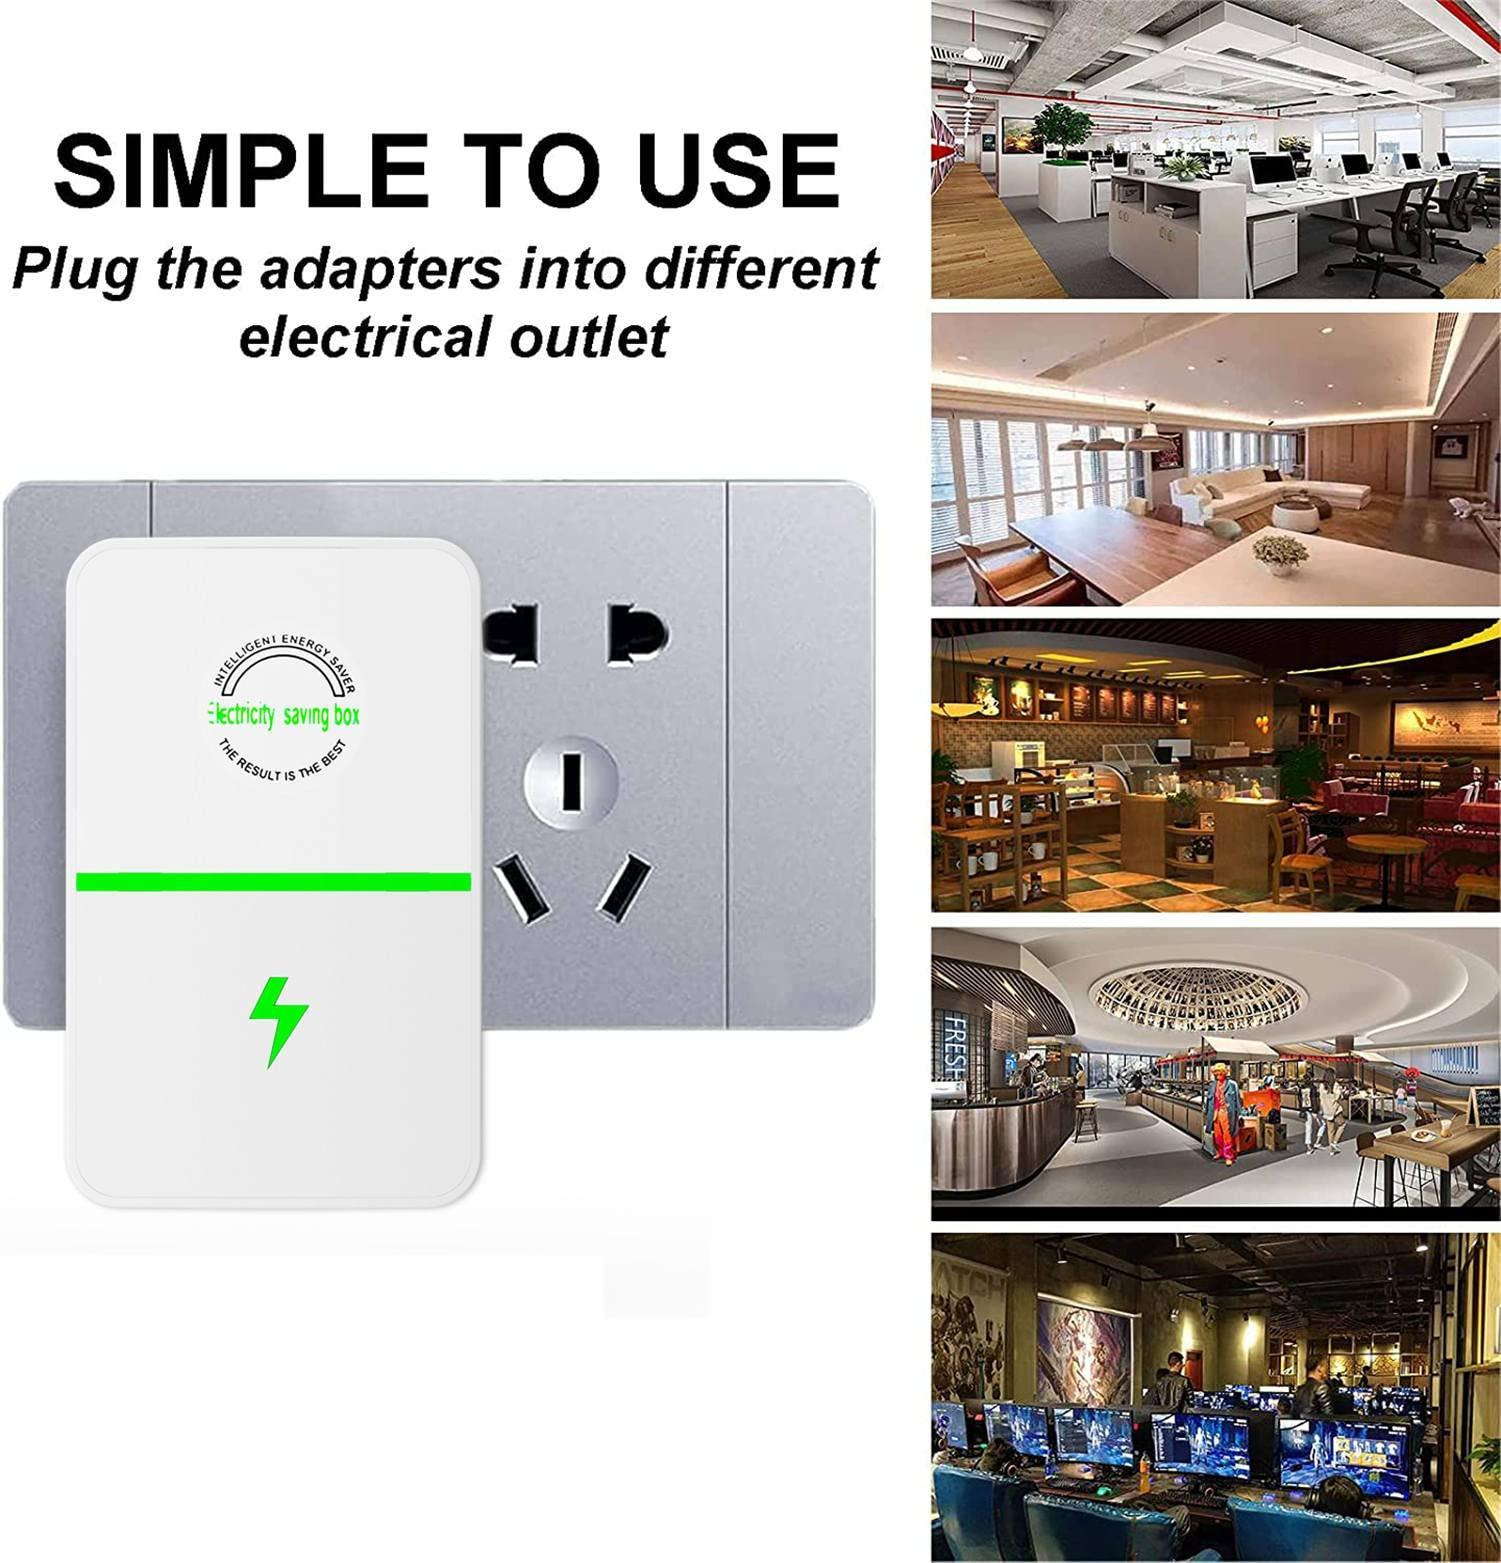 Pro Power Saver Electricity Saving Box Intellegent Pro Power Save Energy  Saver Device for Household Office Shop Appliance 